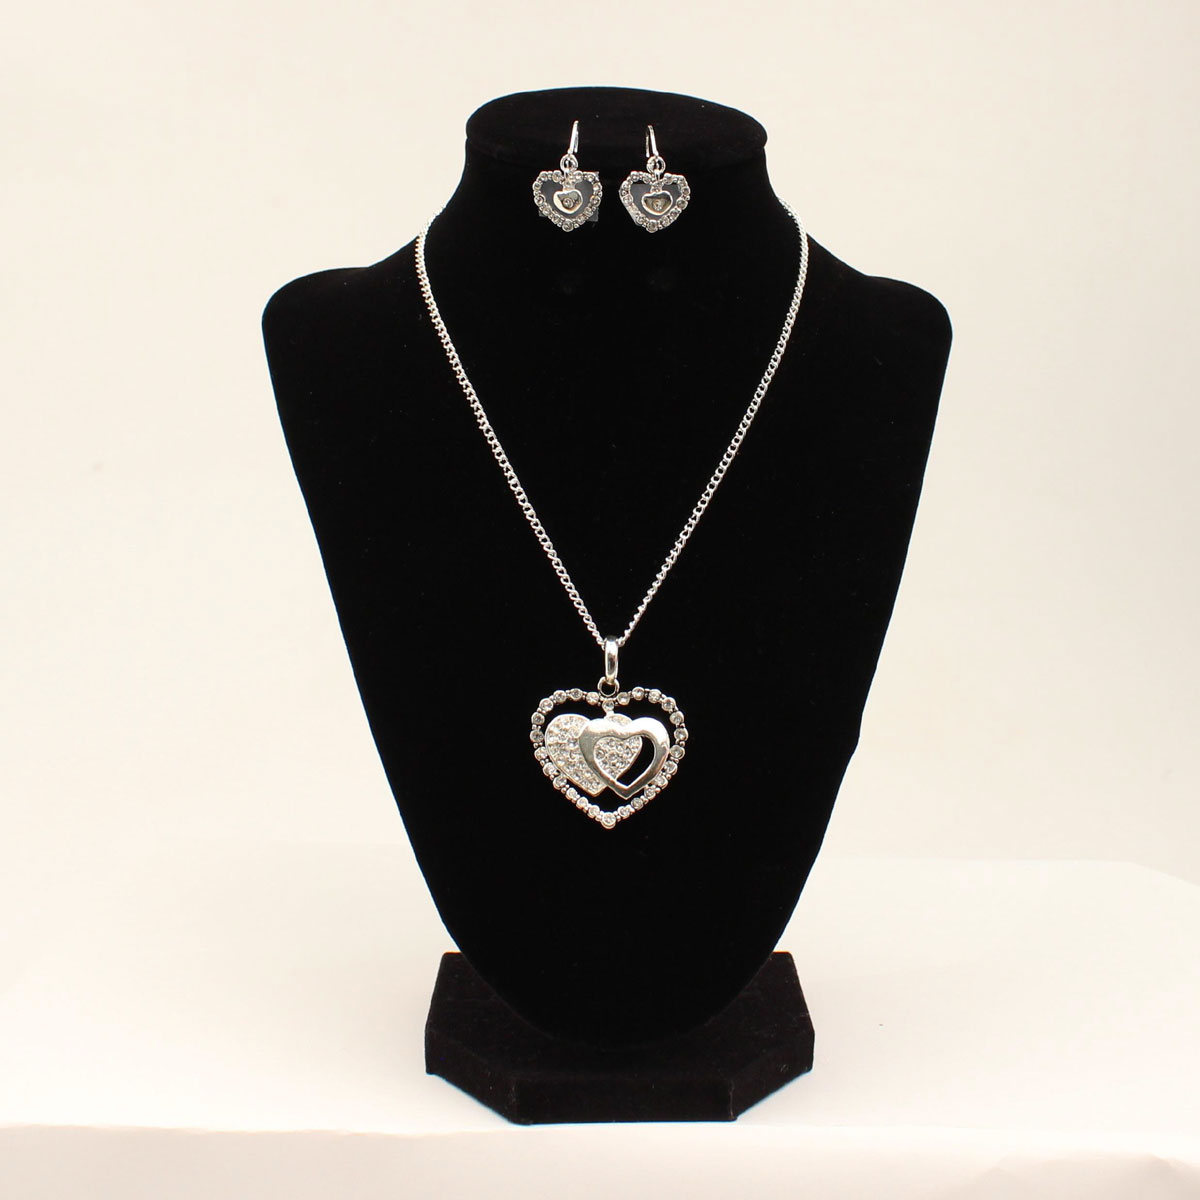 Dbuen1040 Smooth & Crystal Heart Shaped Pendant